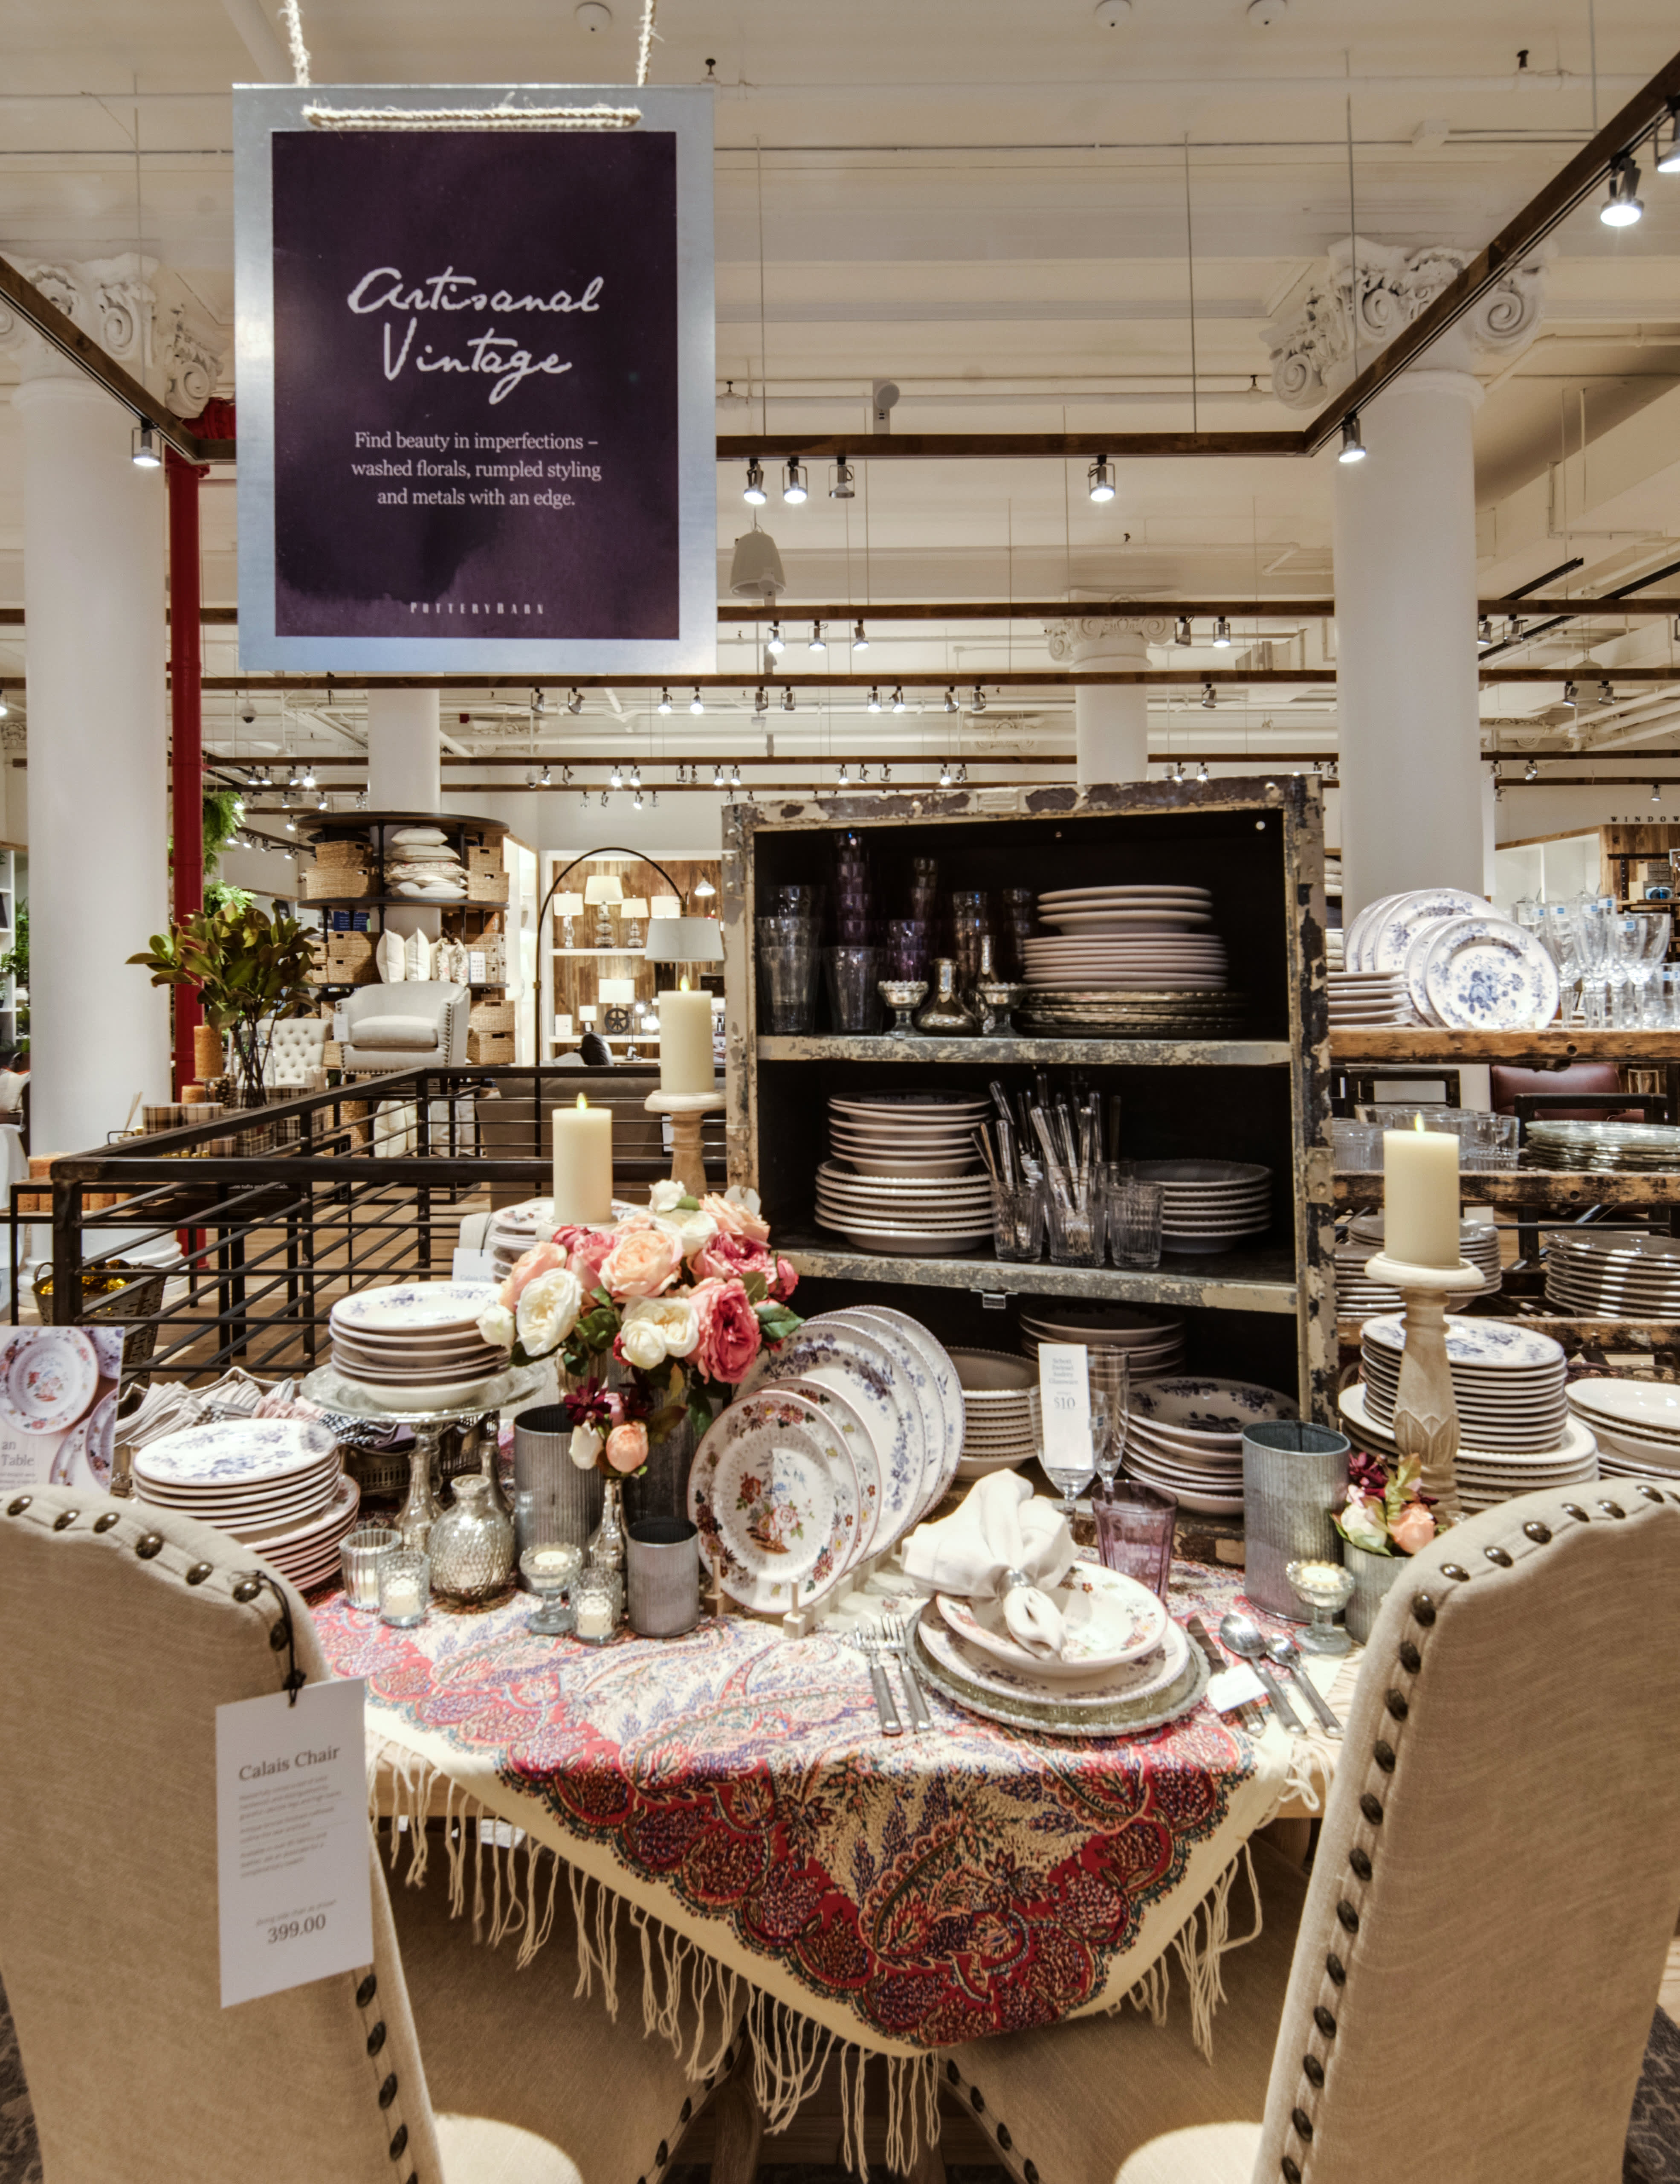 Pottery Barn  Shopping in Midtown West, New York